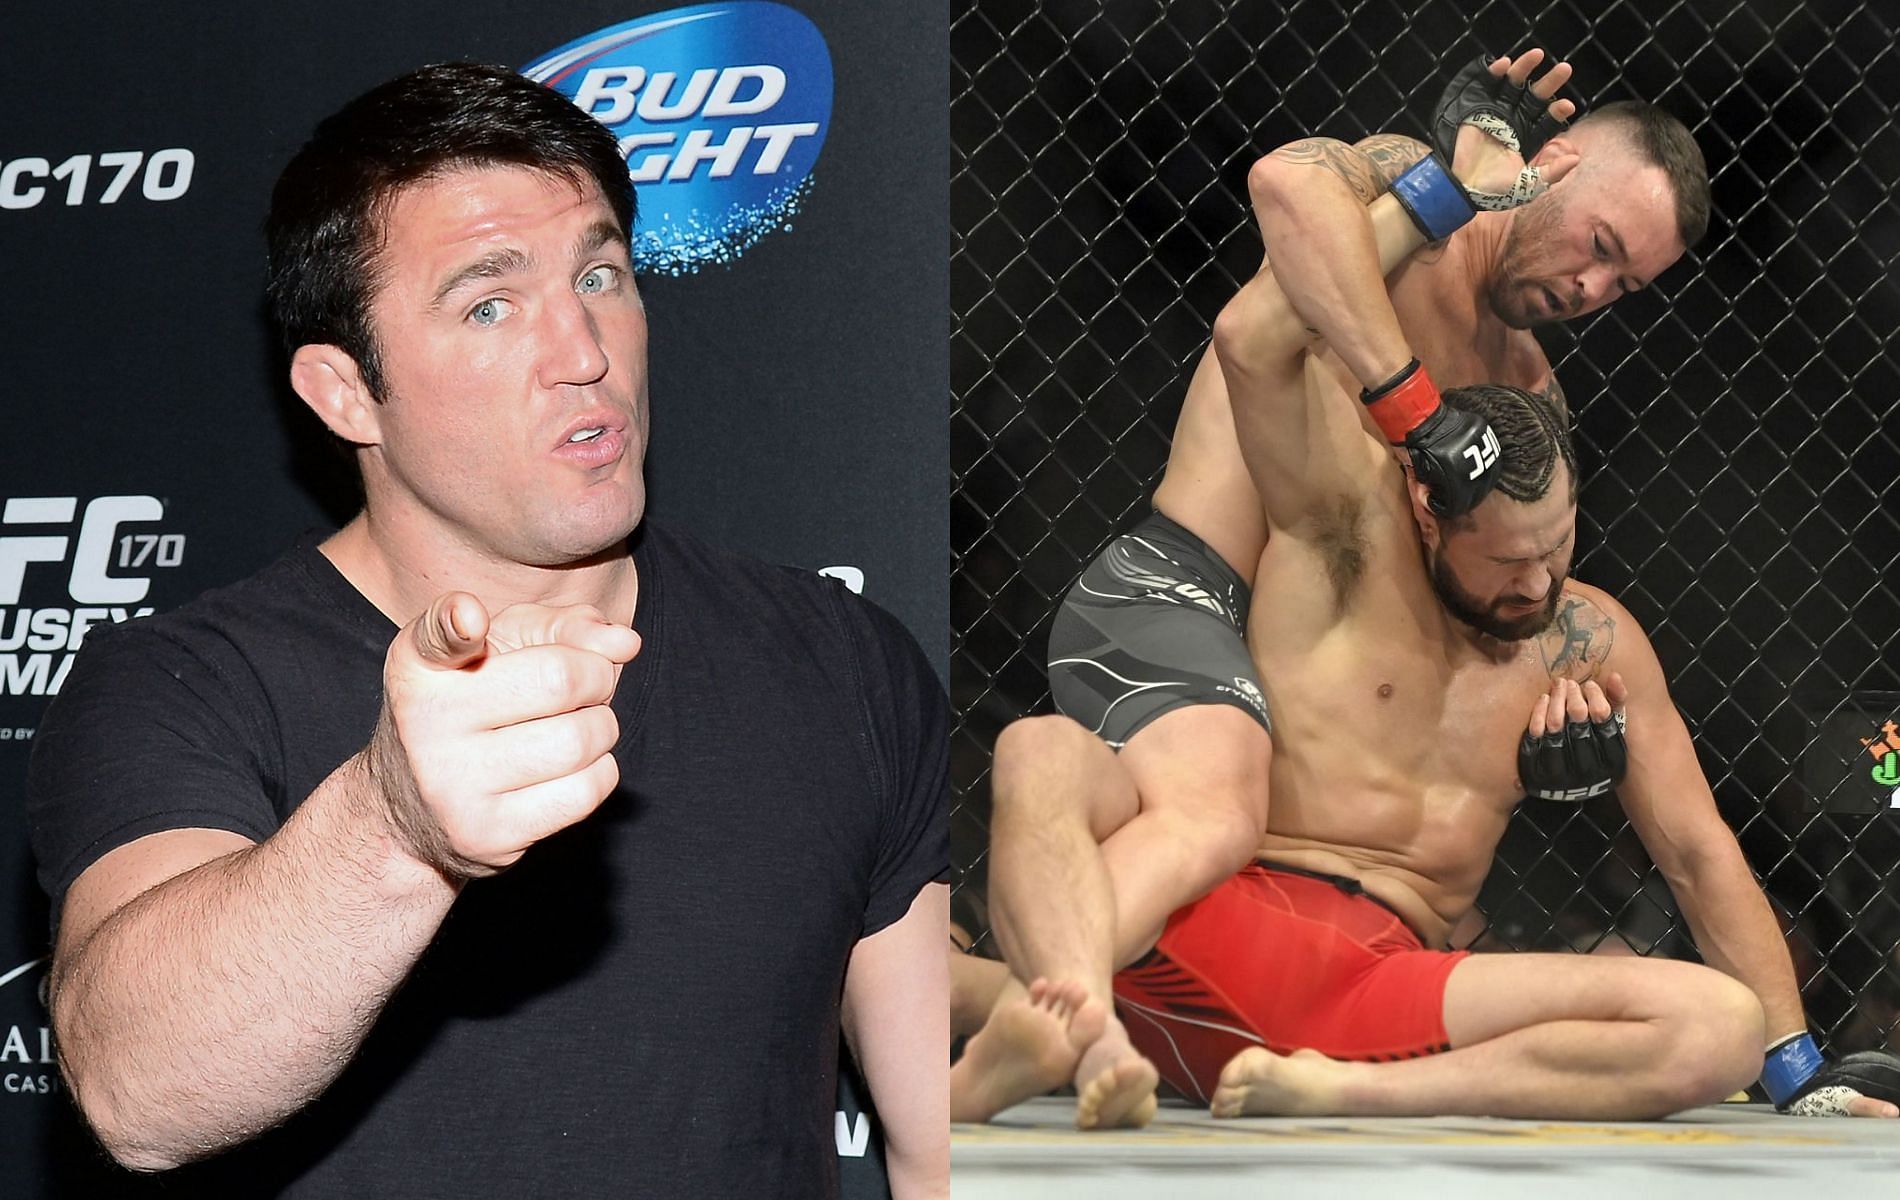 “There’s no illusion, there’s no mystery” – Chael Sonnen on Jorge Masvidal and Colby Covington underperforming at UFC 272